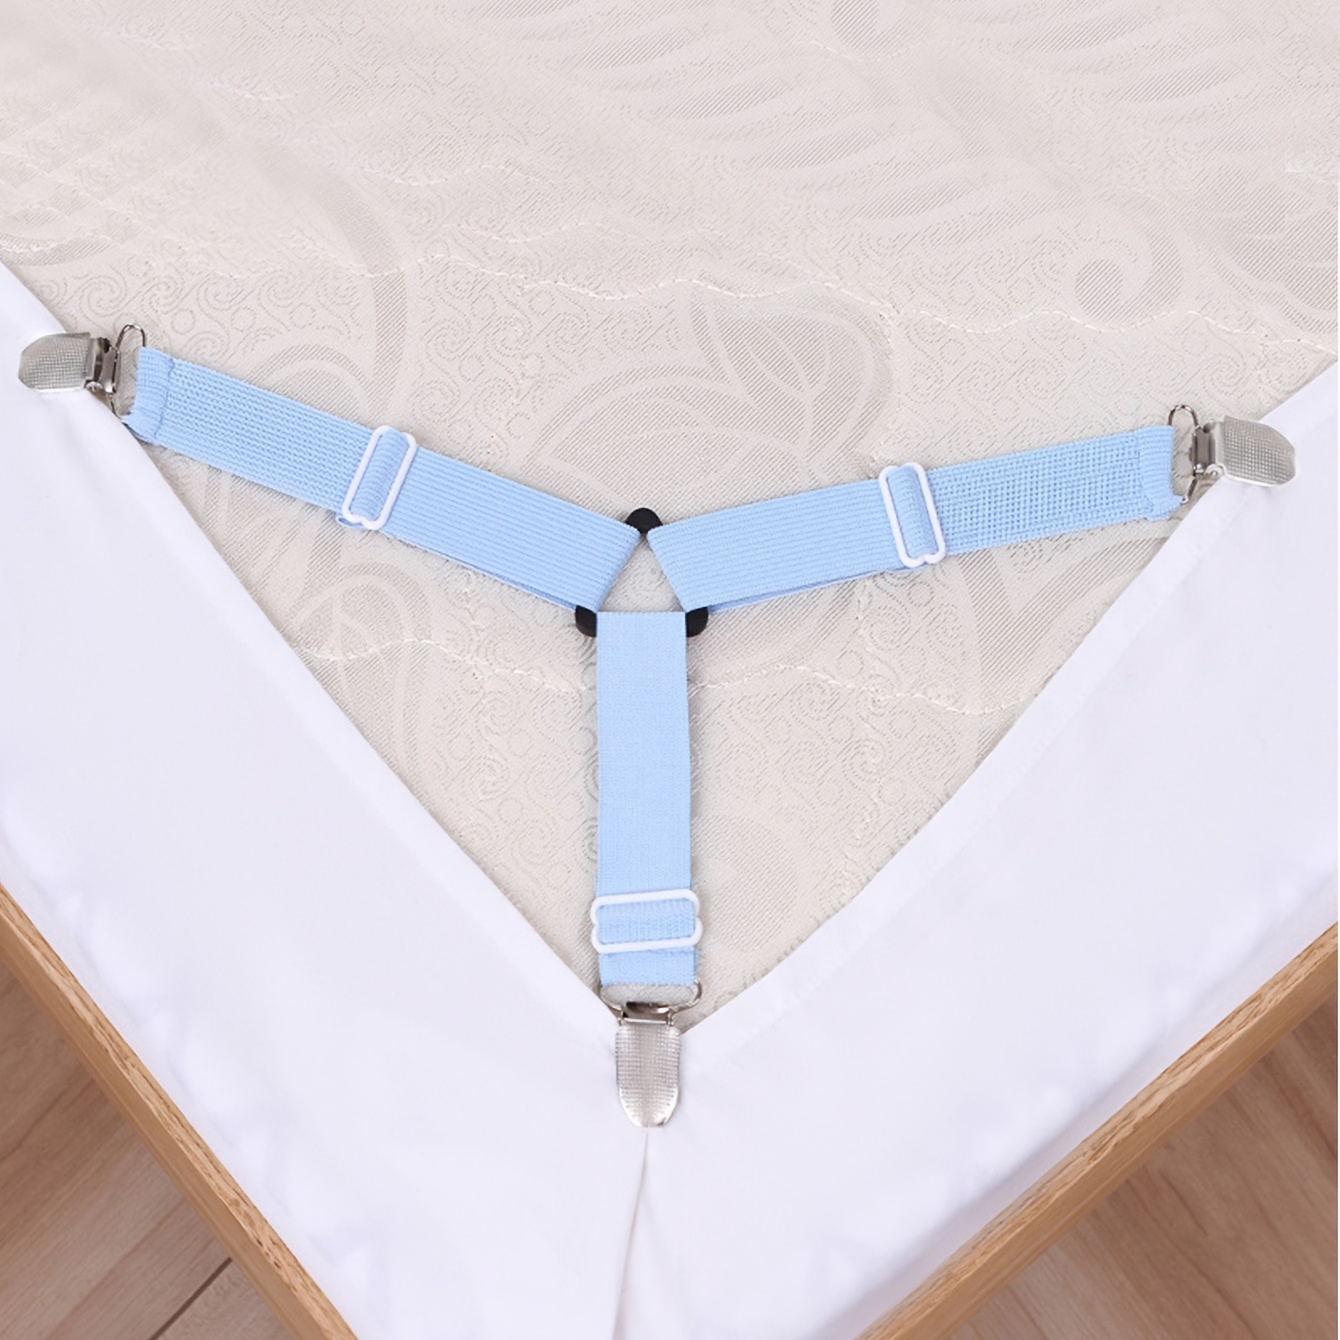 Sheet Grippers - Elastic Bed Sheet Suspender Clips - Fits Any Size